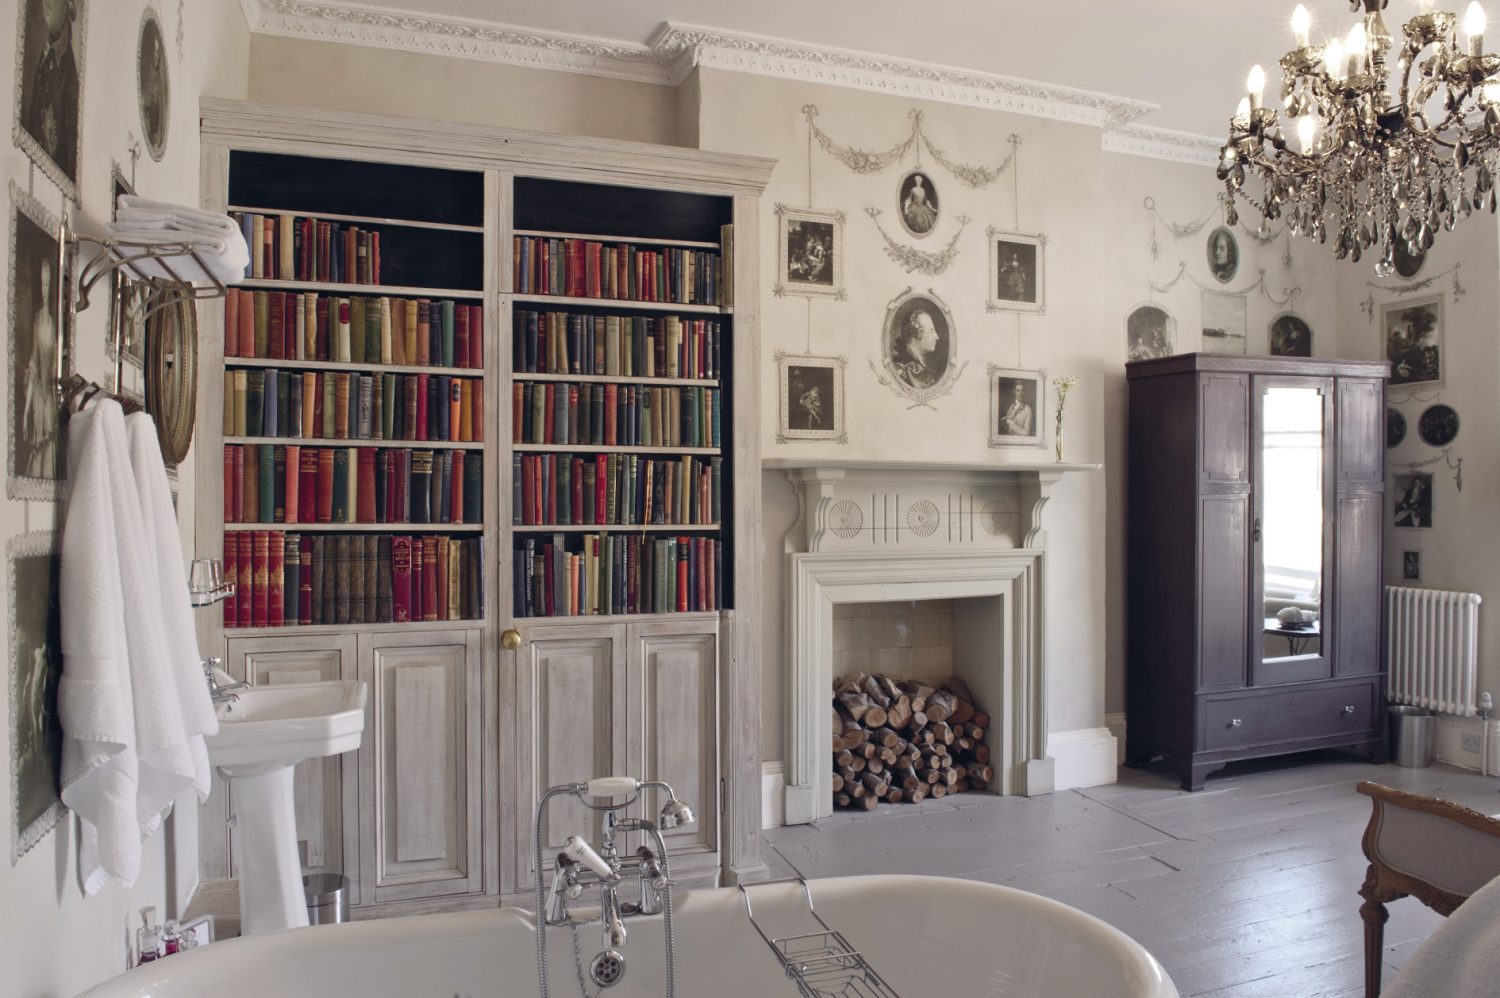 In order to cleverly disguise the loo, the spines of the books were cut off to furnish the doors of the faux bookcase, while the pages were all used to paper the bathroom walls